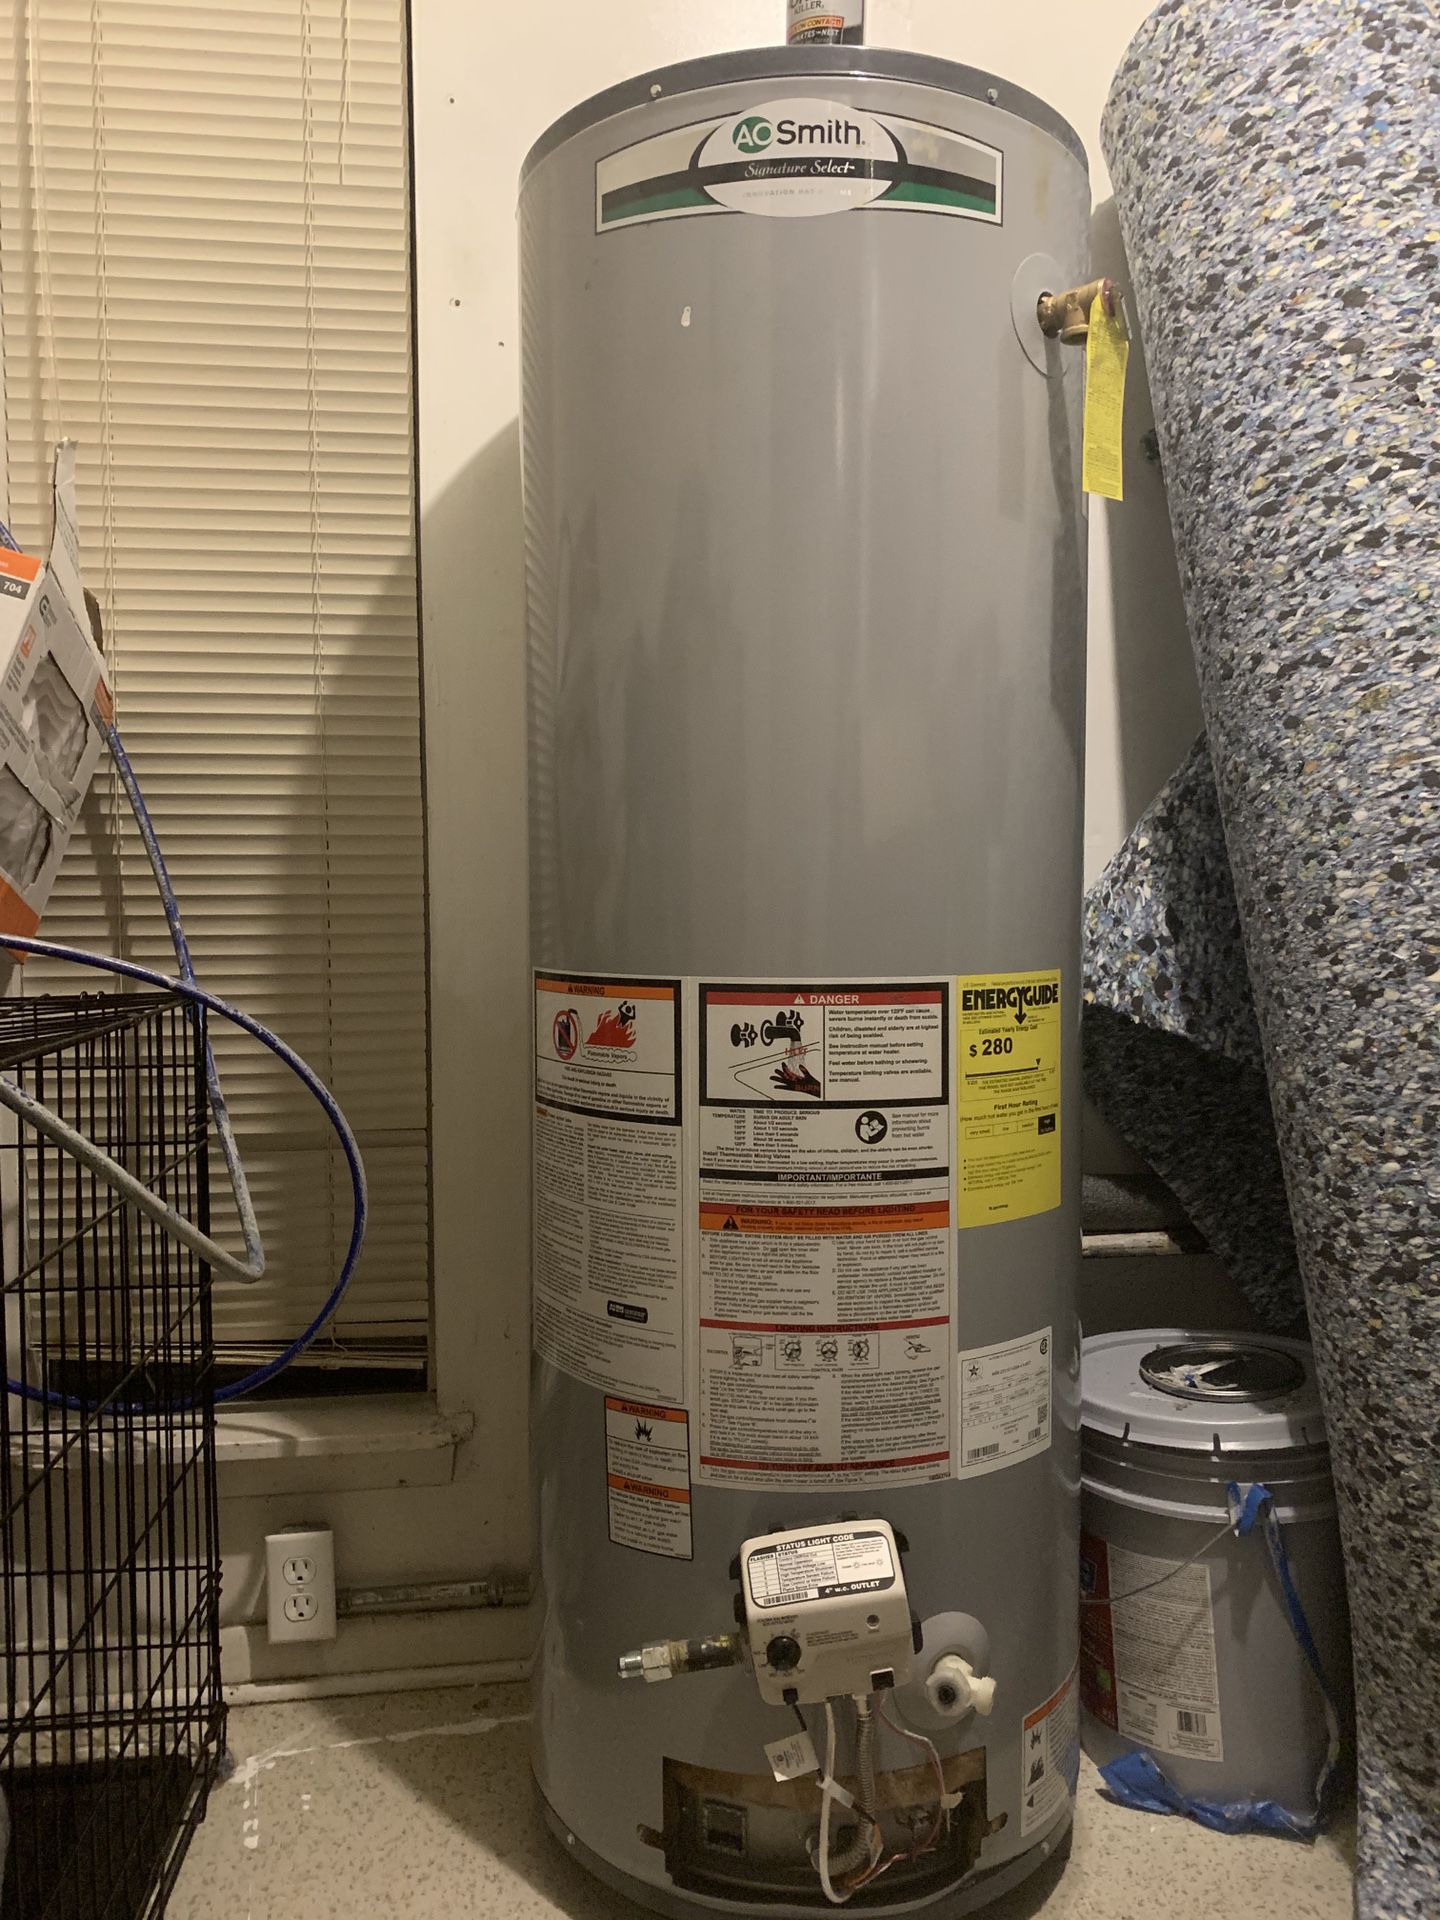 40 gallon gas water heater 2019 Was to tall for my home make me offer